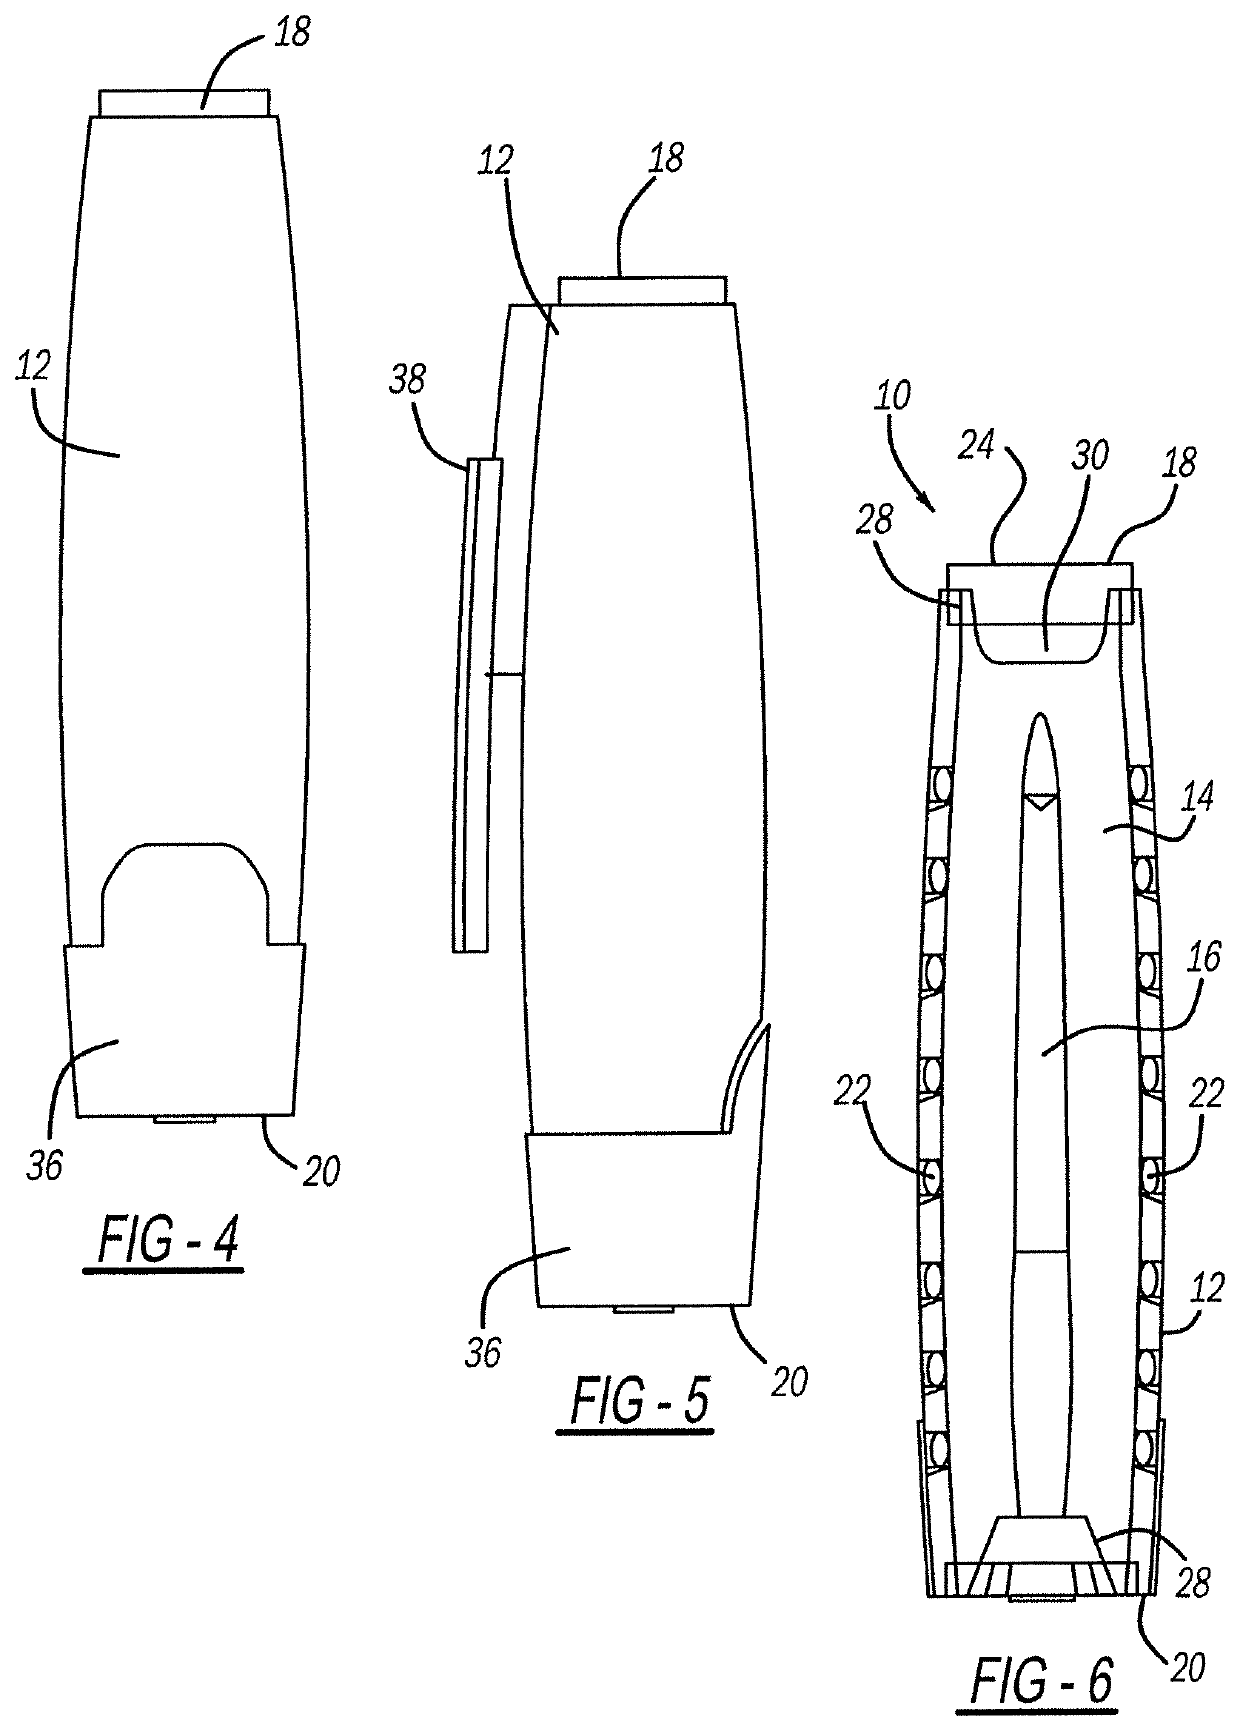 Device for reducing germs on a writing instrument or stylus